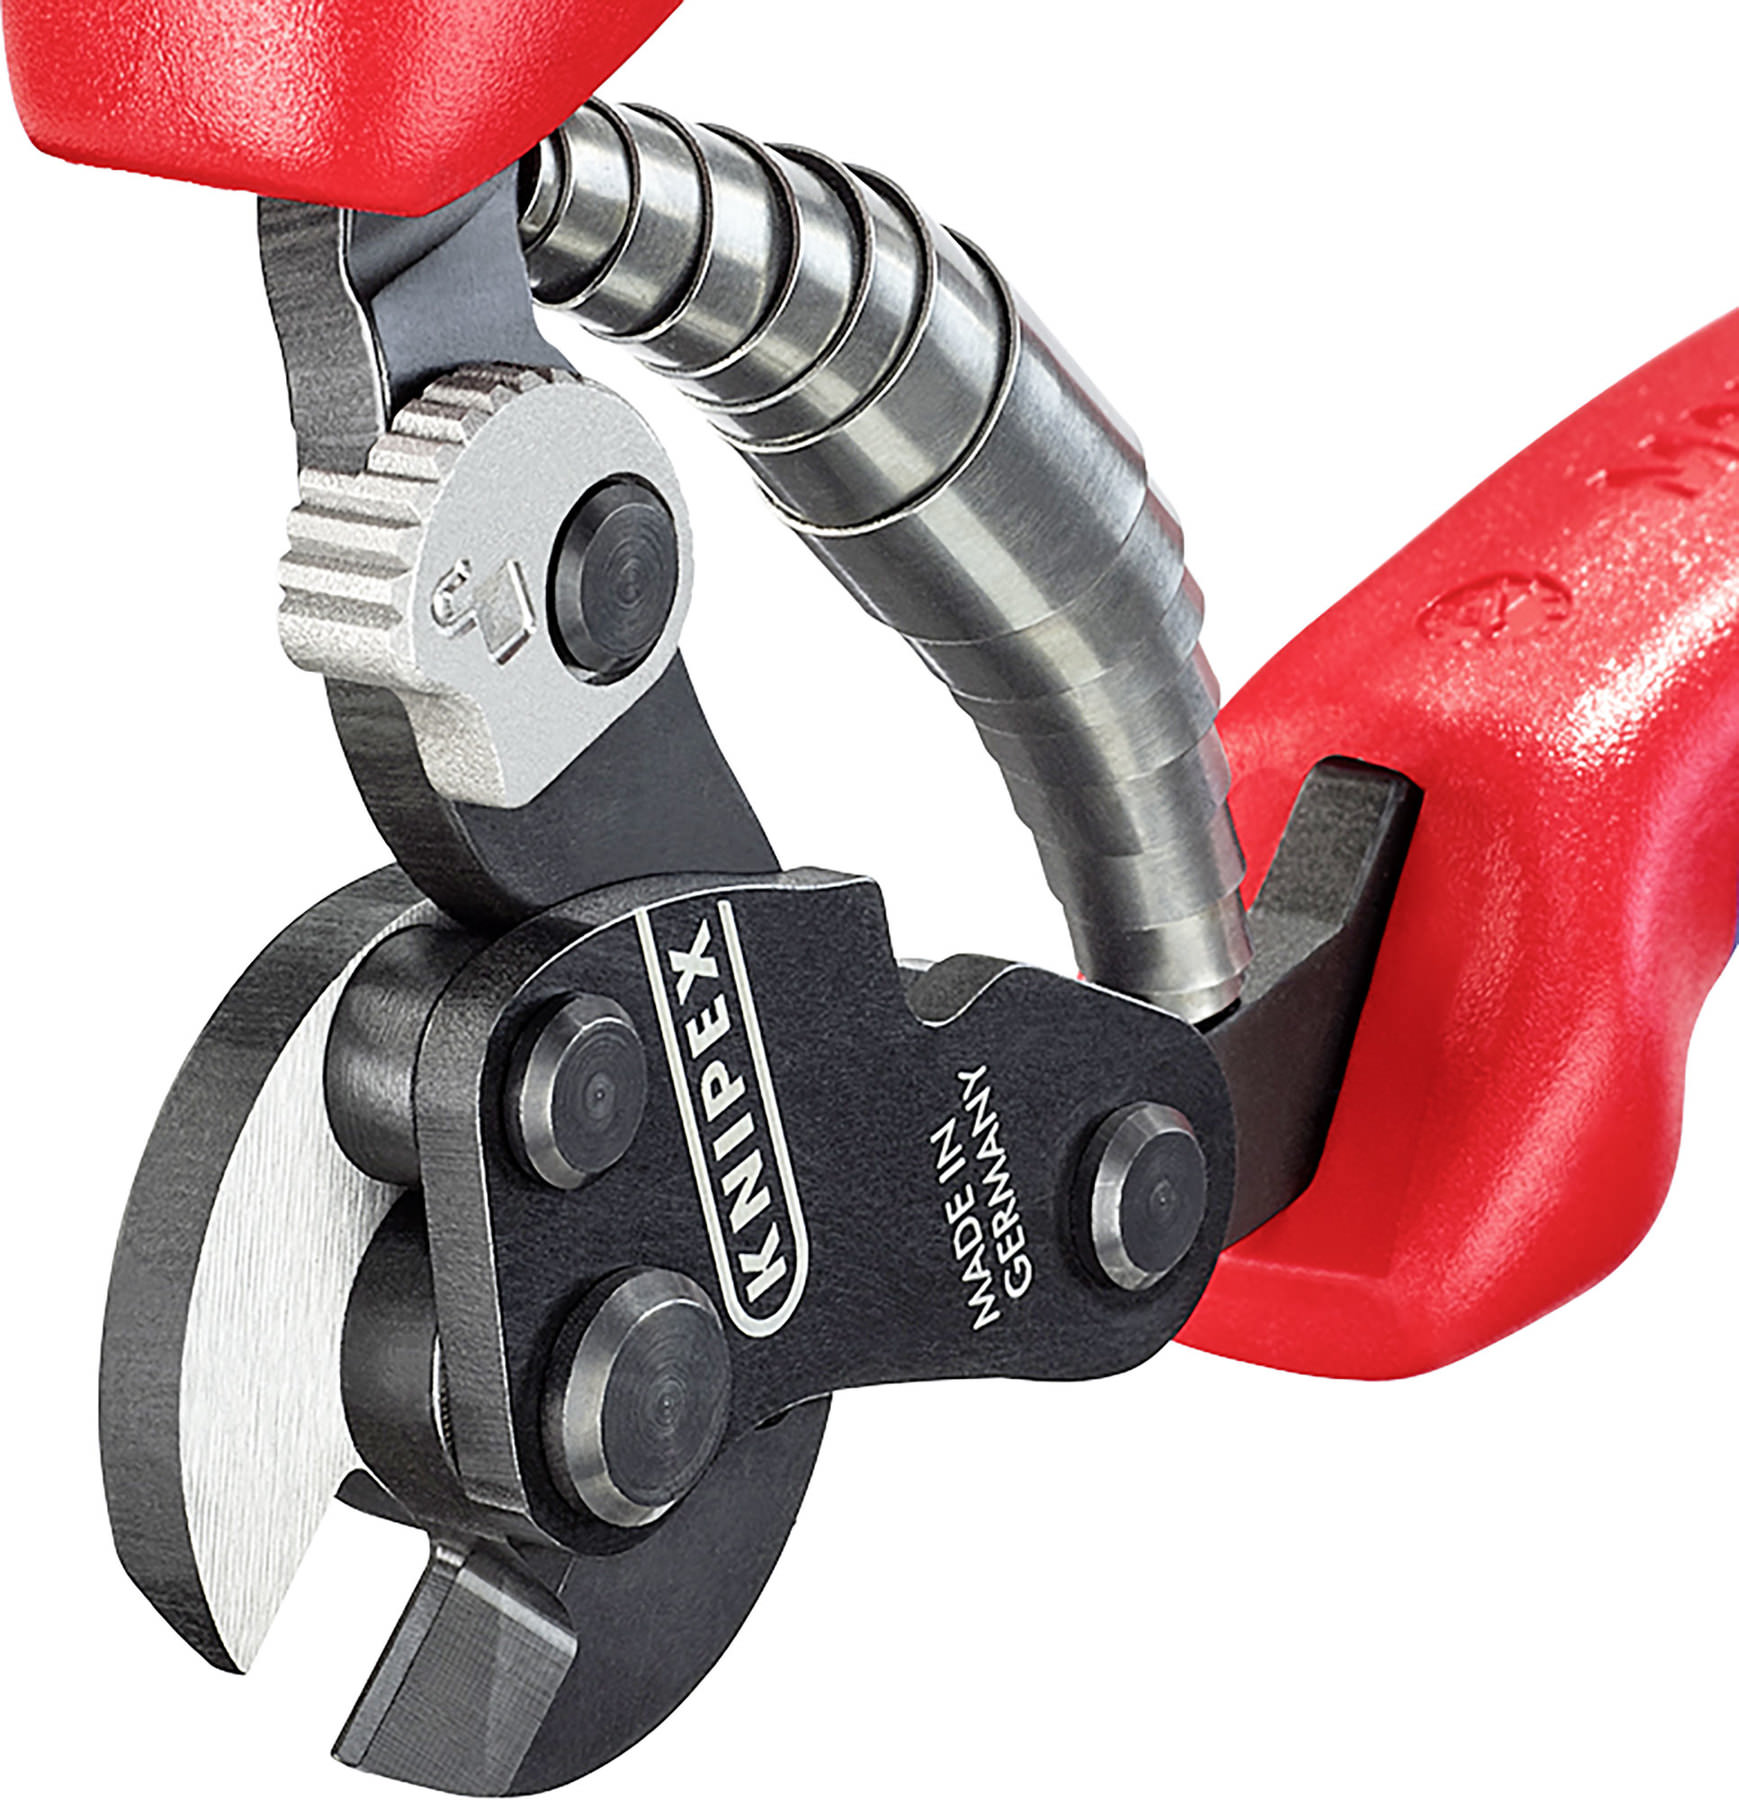 Channellock End Cutters - Lee Valley Tools